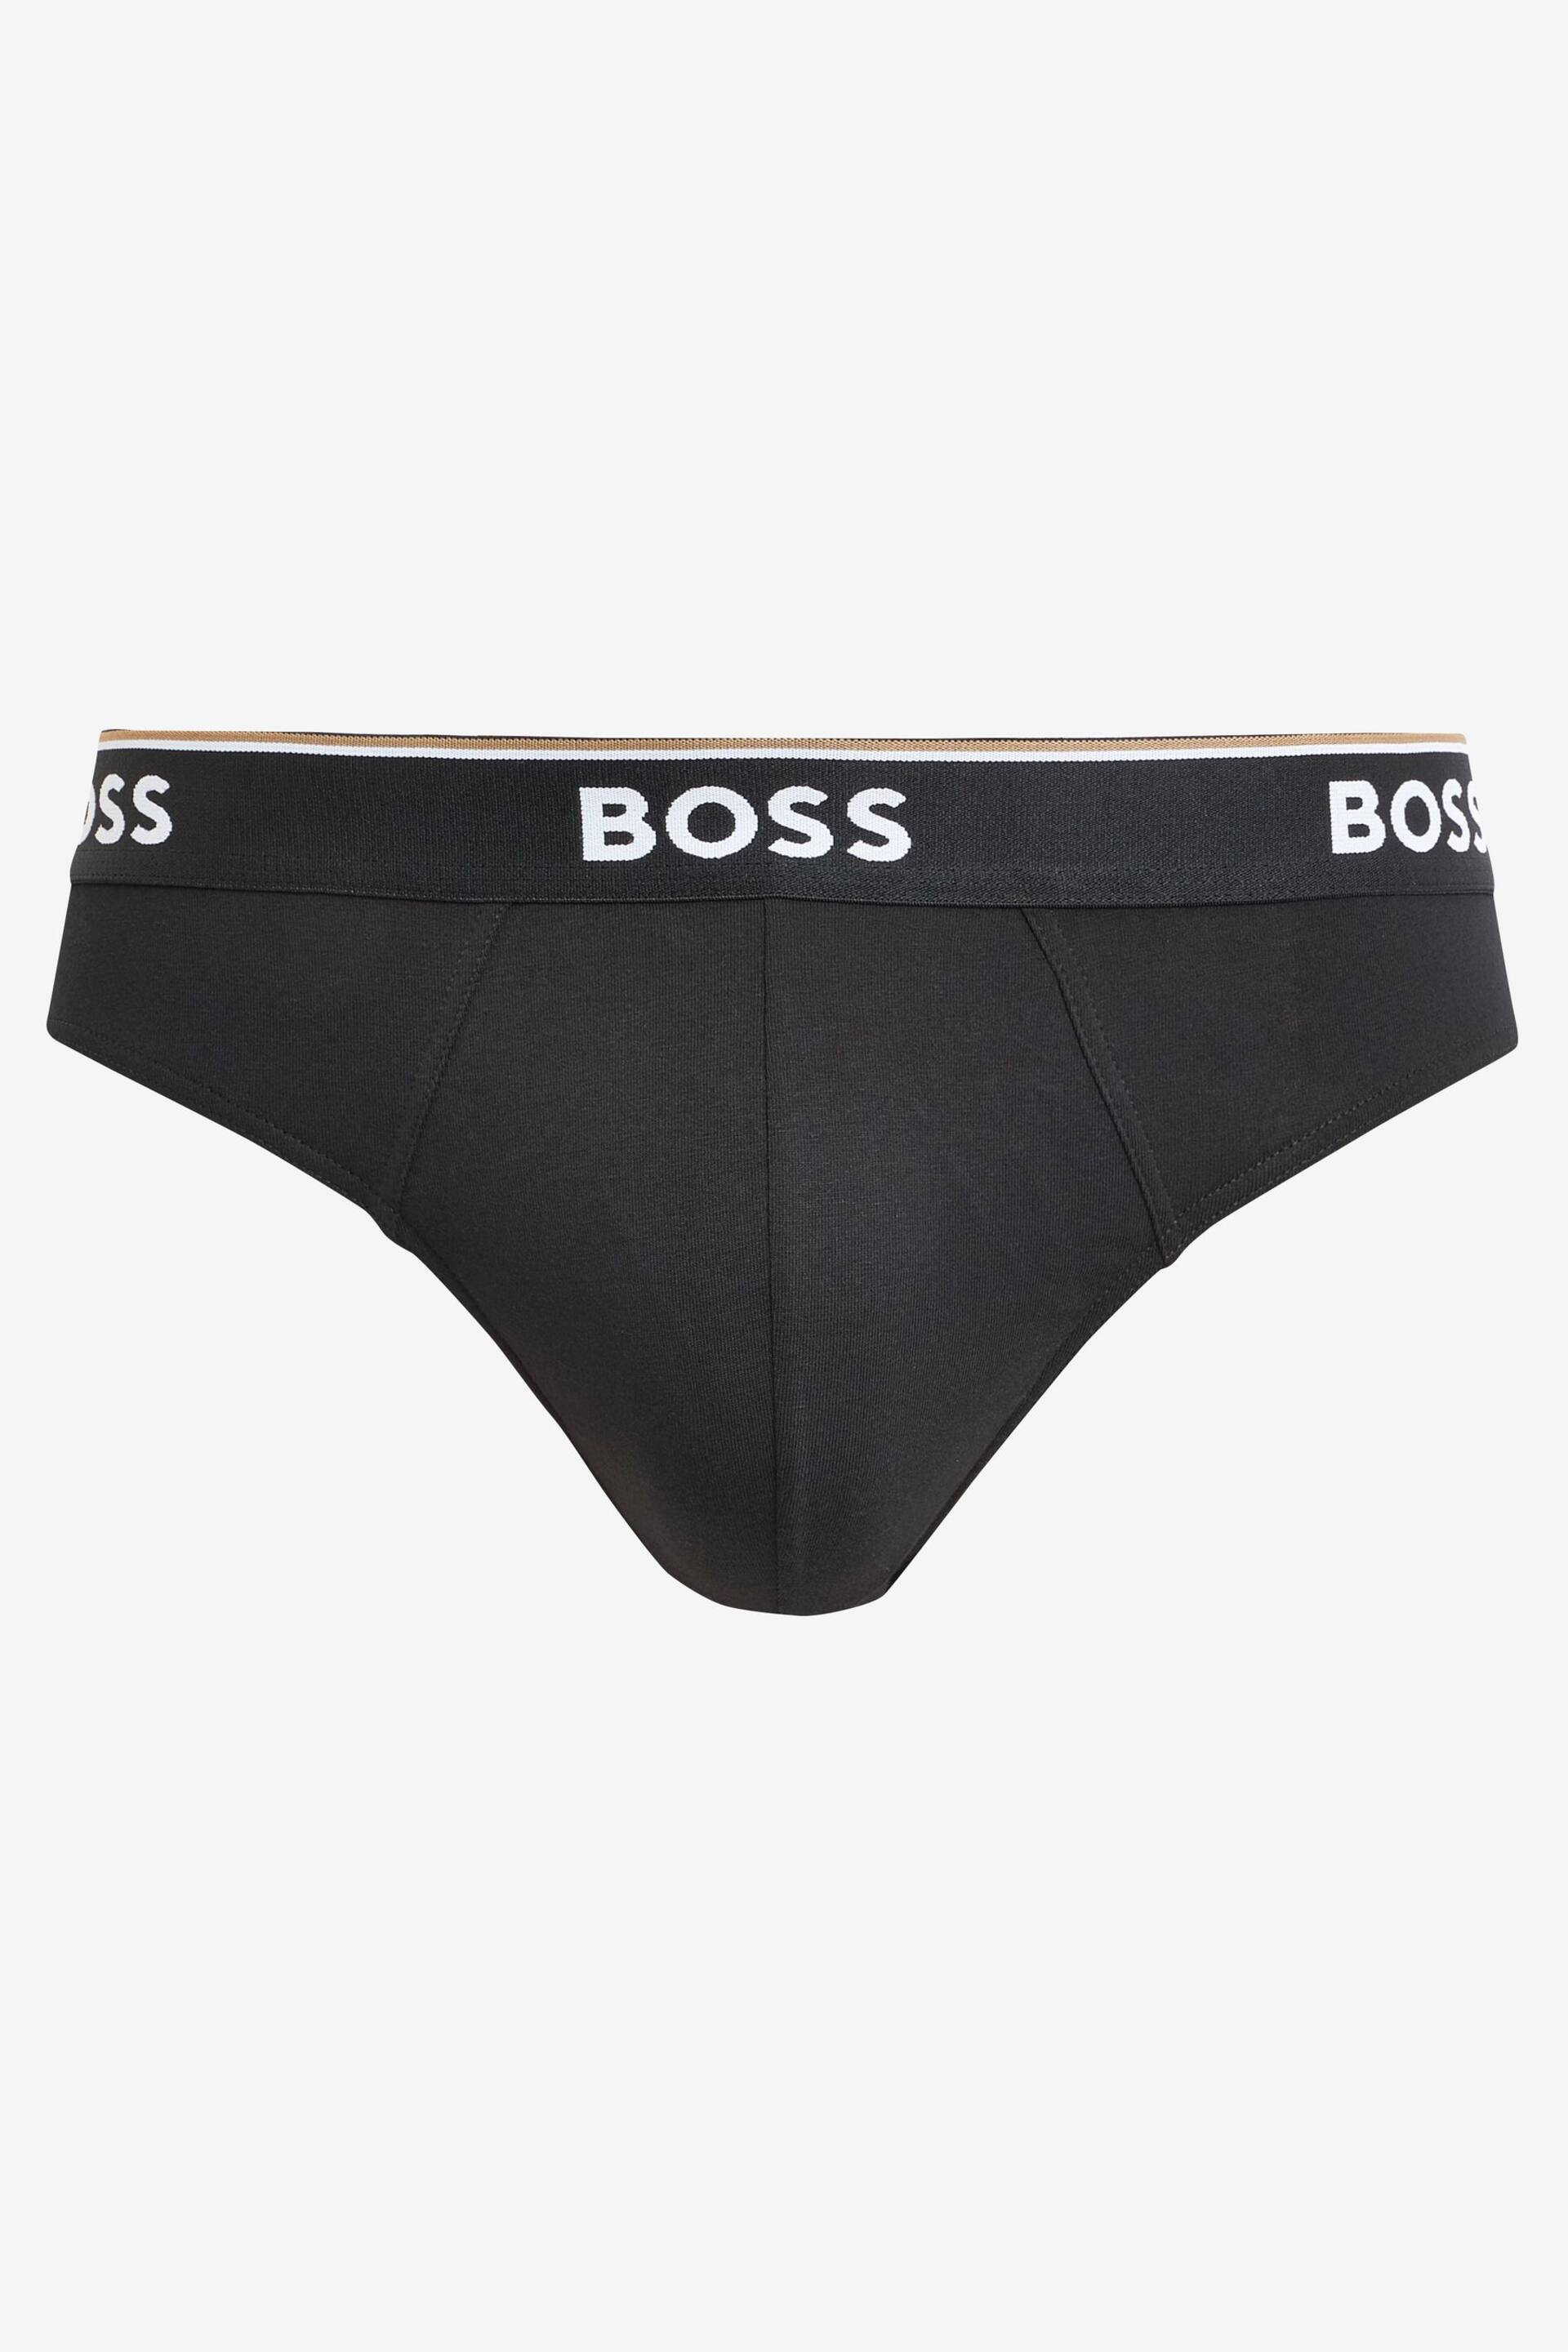 BOSS Grey Power Briefs 3 Pack - Image 3 of 9